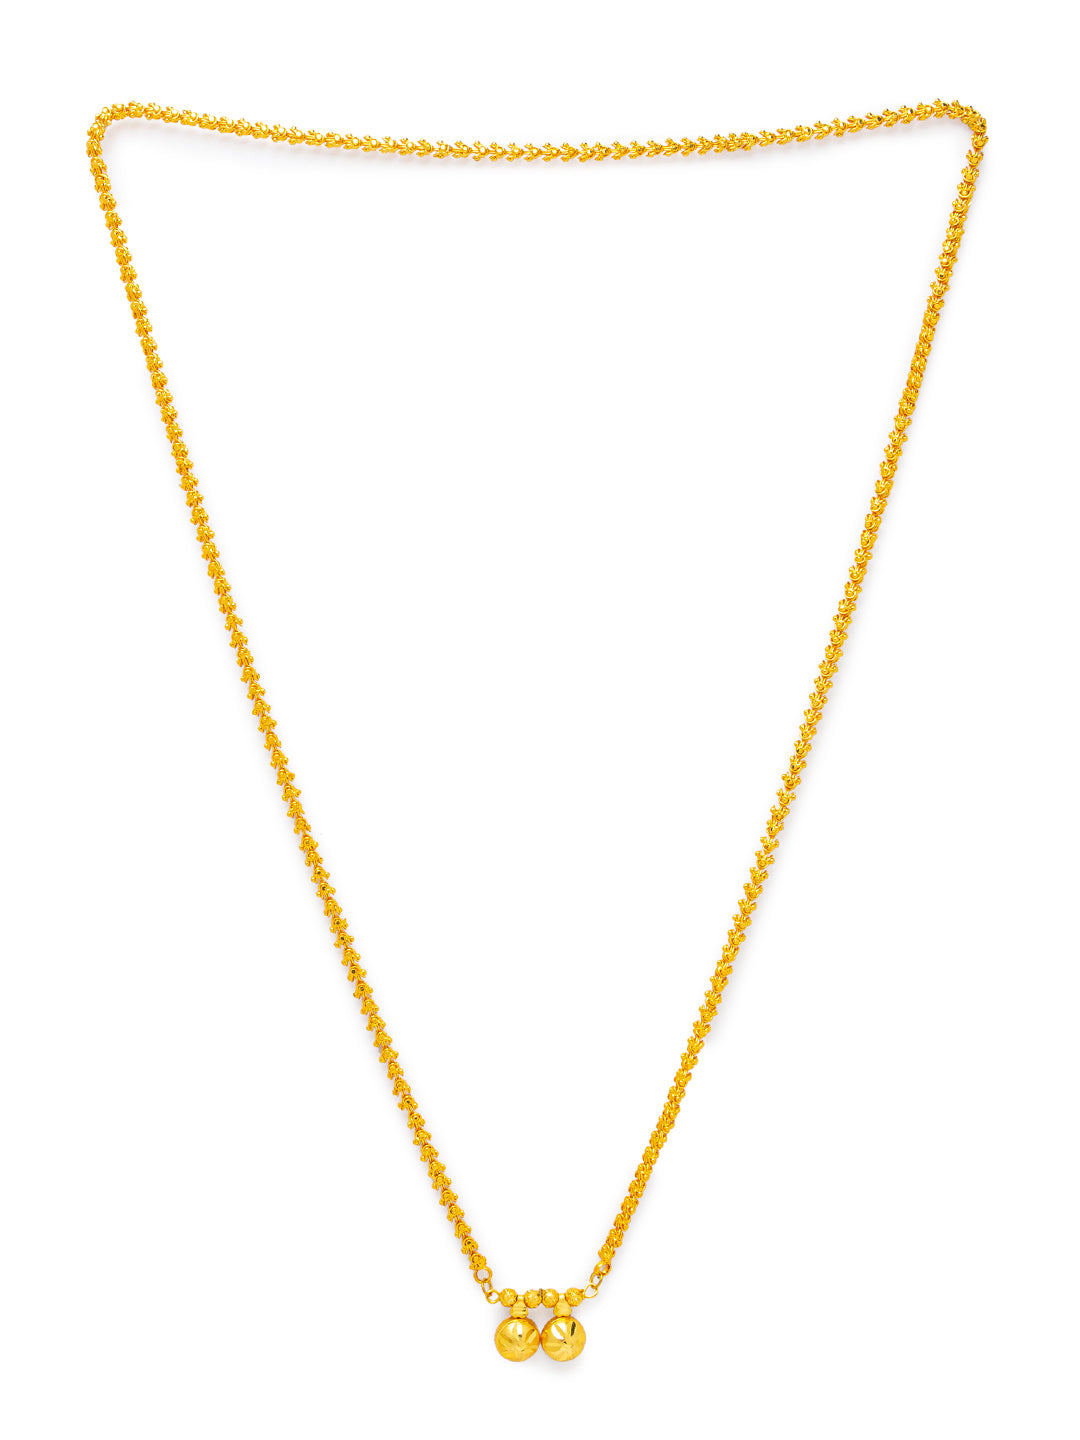 Long Chain Necklace Designs Gold Plated Floral Designs Chain with Vati ...